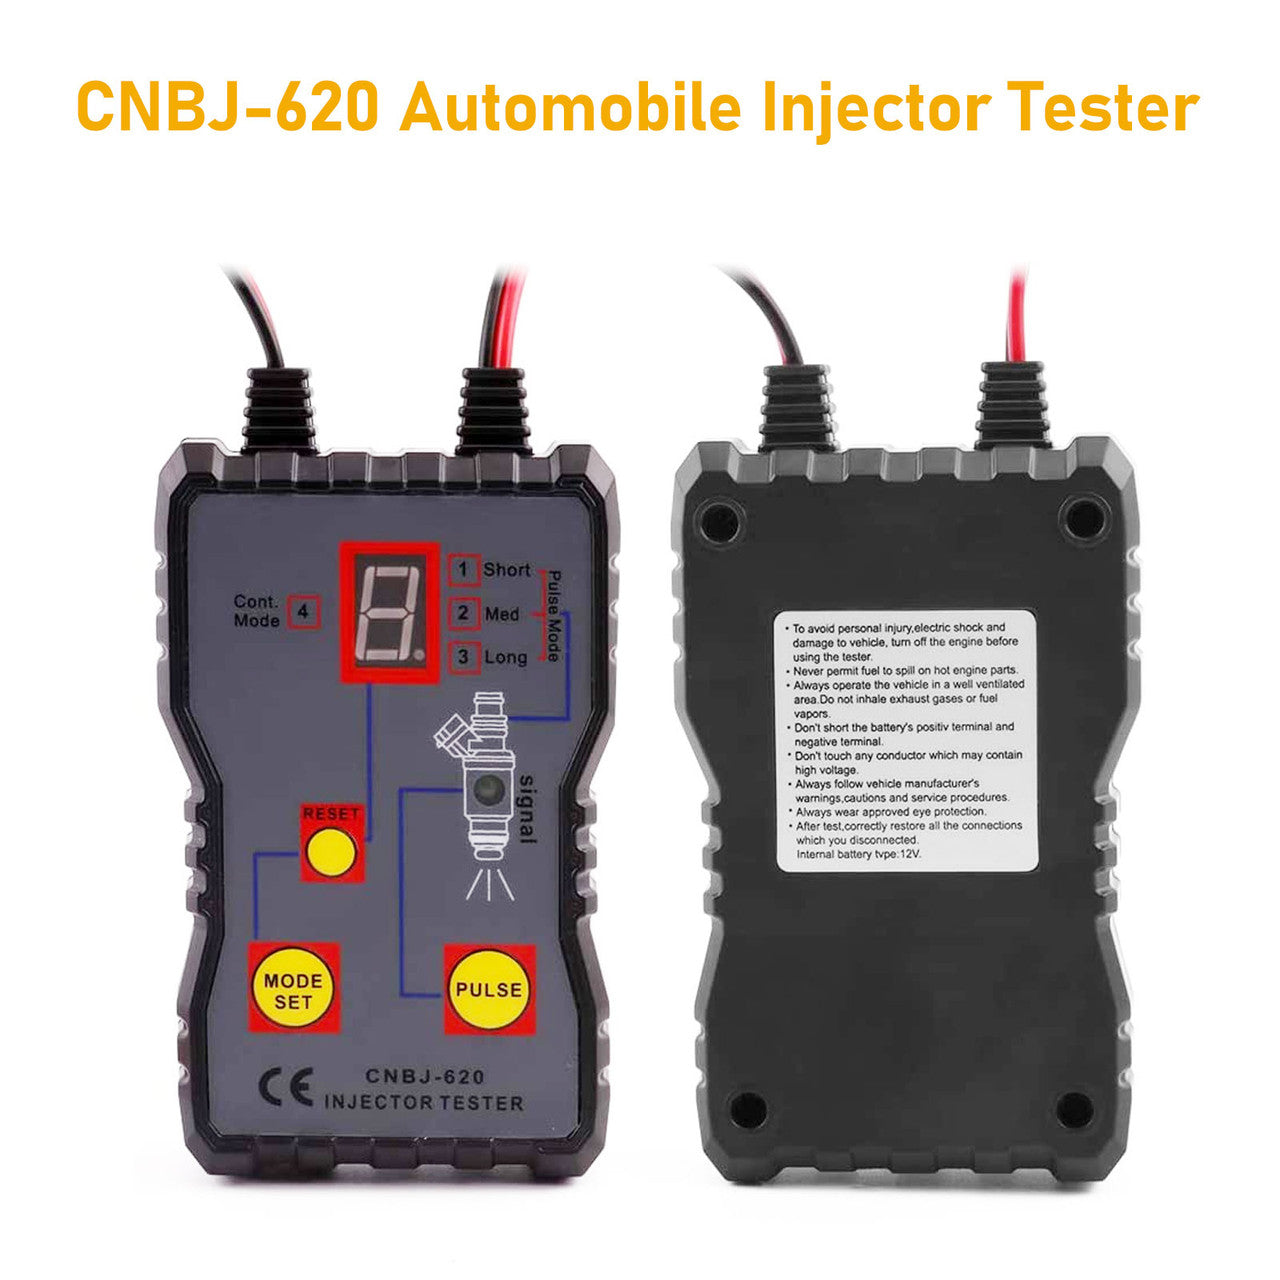 Car Fuel Injector Tester - Comes With An LED Display And 4 Pulse Modes